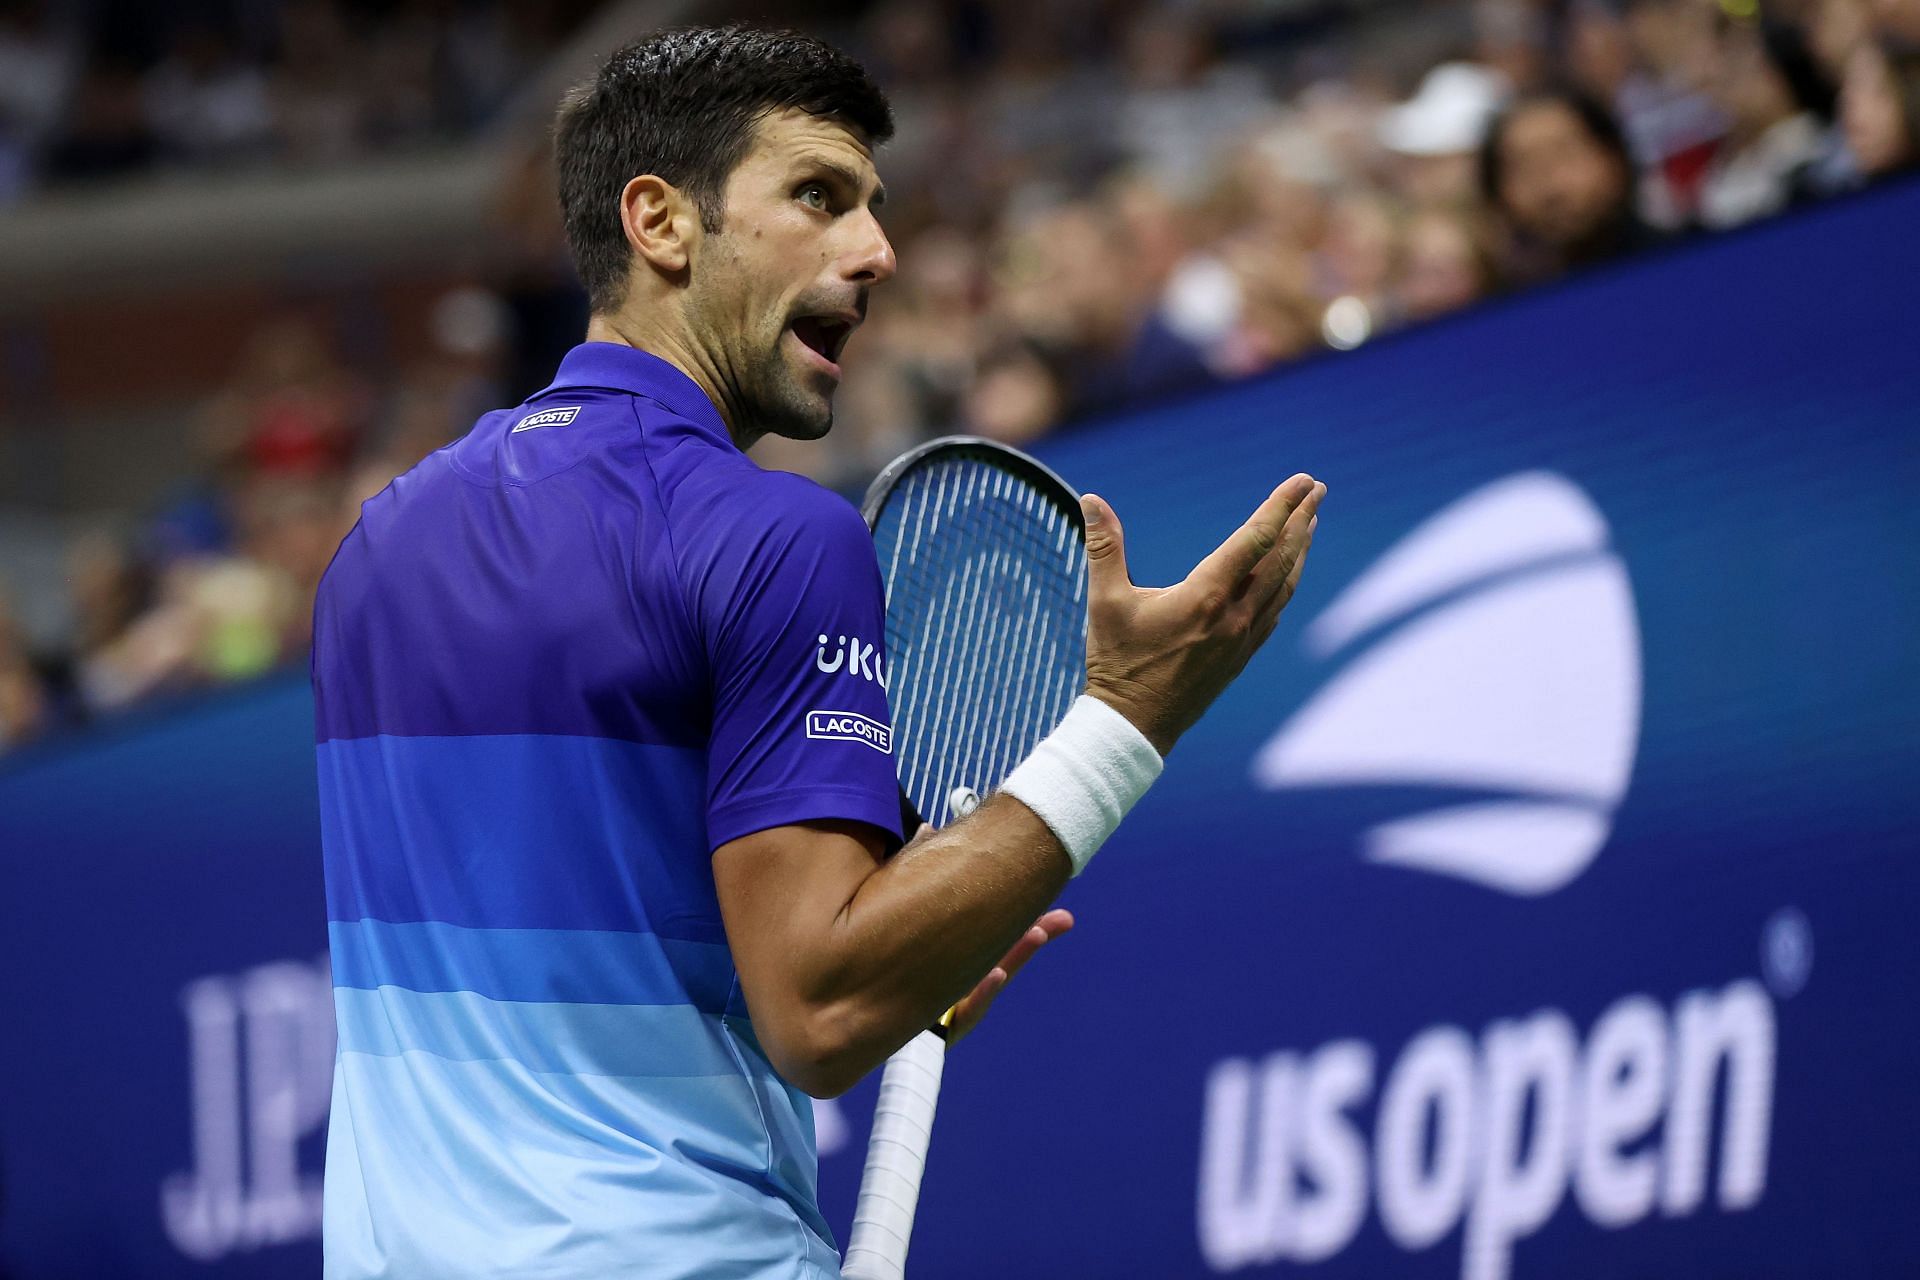 Novak Djokovic to lose 1200 points from the US Open